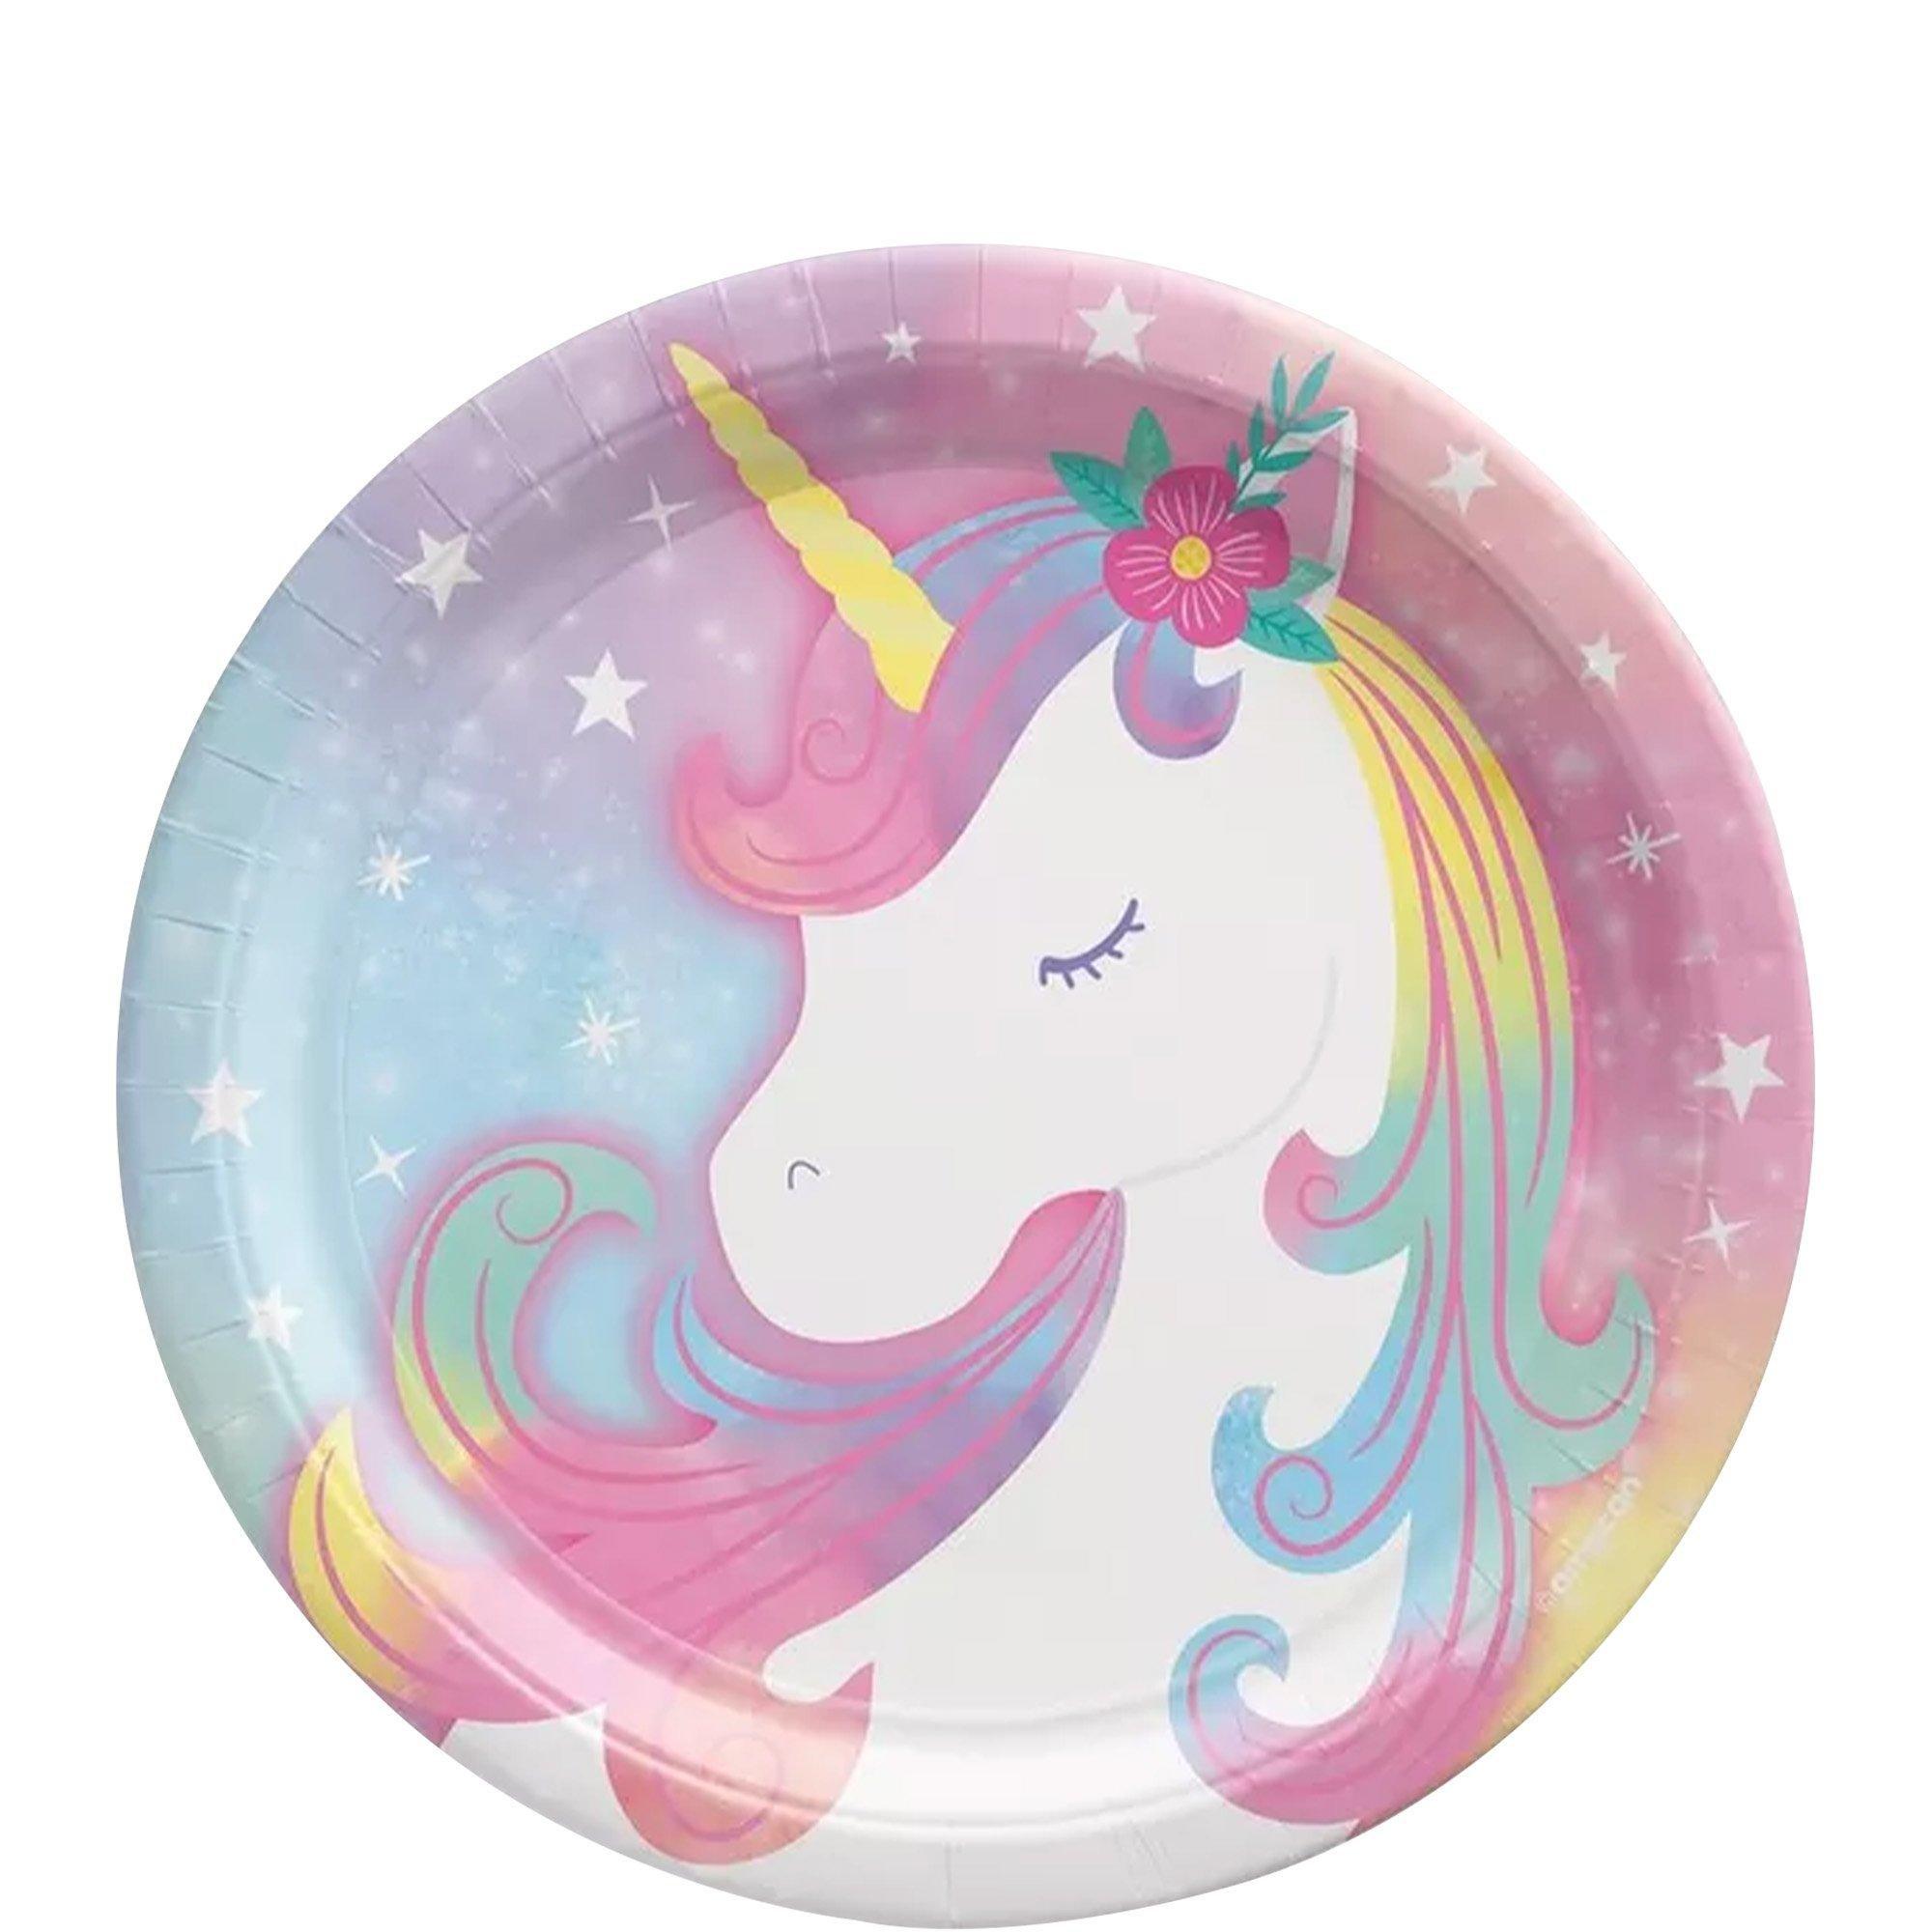 Enchanted Unicorn Party Supplies Pack for 8 Guests - Kit Includes Plates, Napkins & Table Cover